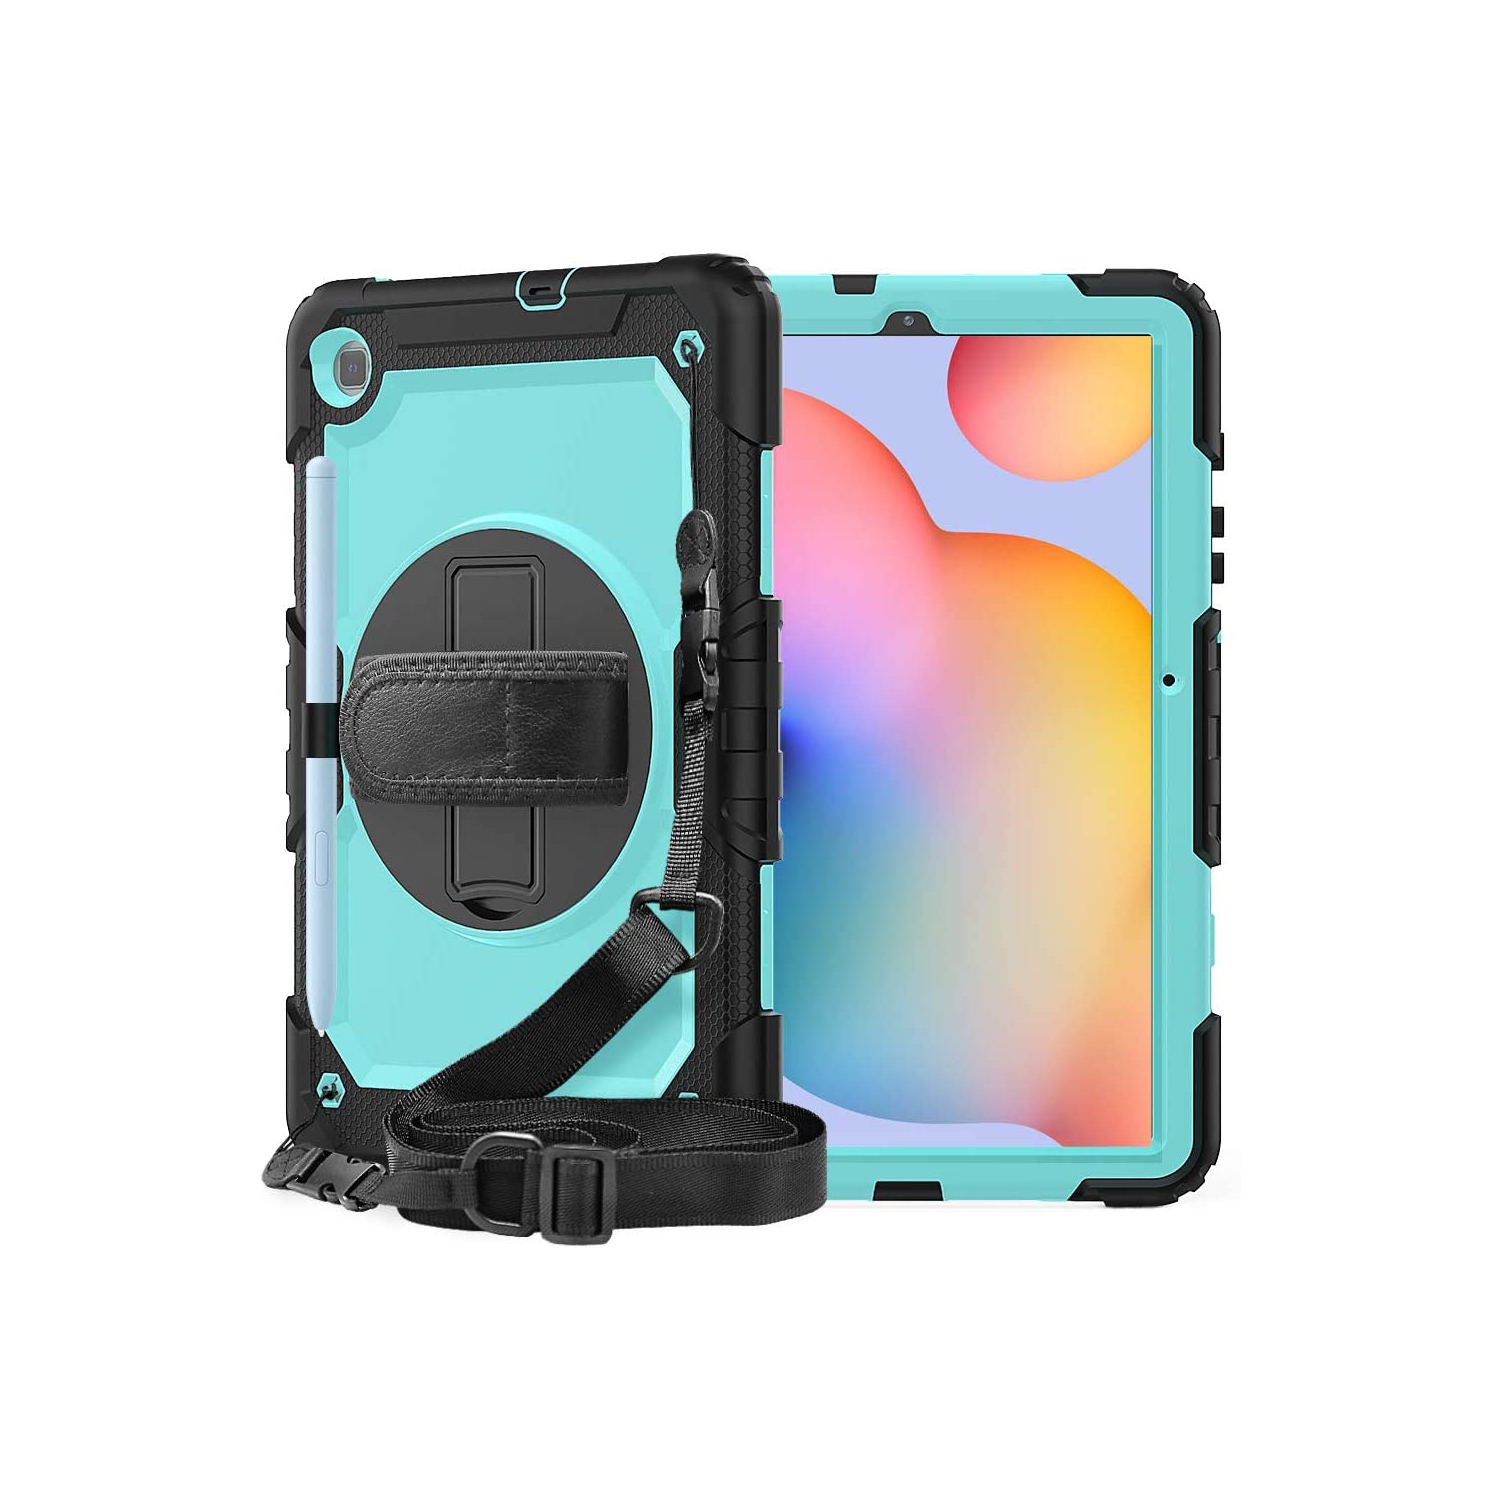 Samsung Tab S6 Lite Case 10.4 Inch 2022 with Screen Protector S Heavy Duty Shockproof Protective Case with 360 Rotate Stand Handle Shoulder Strap for Tab S6 Lite SM-P610/P615 202